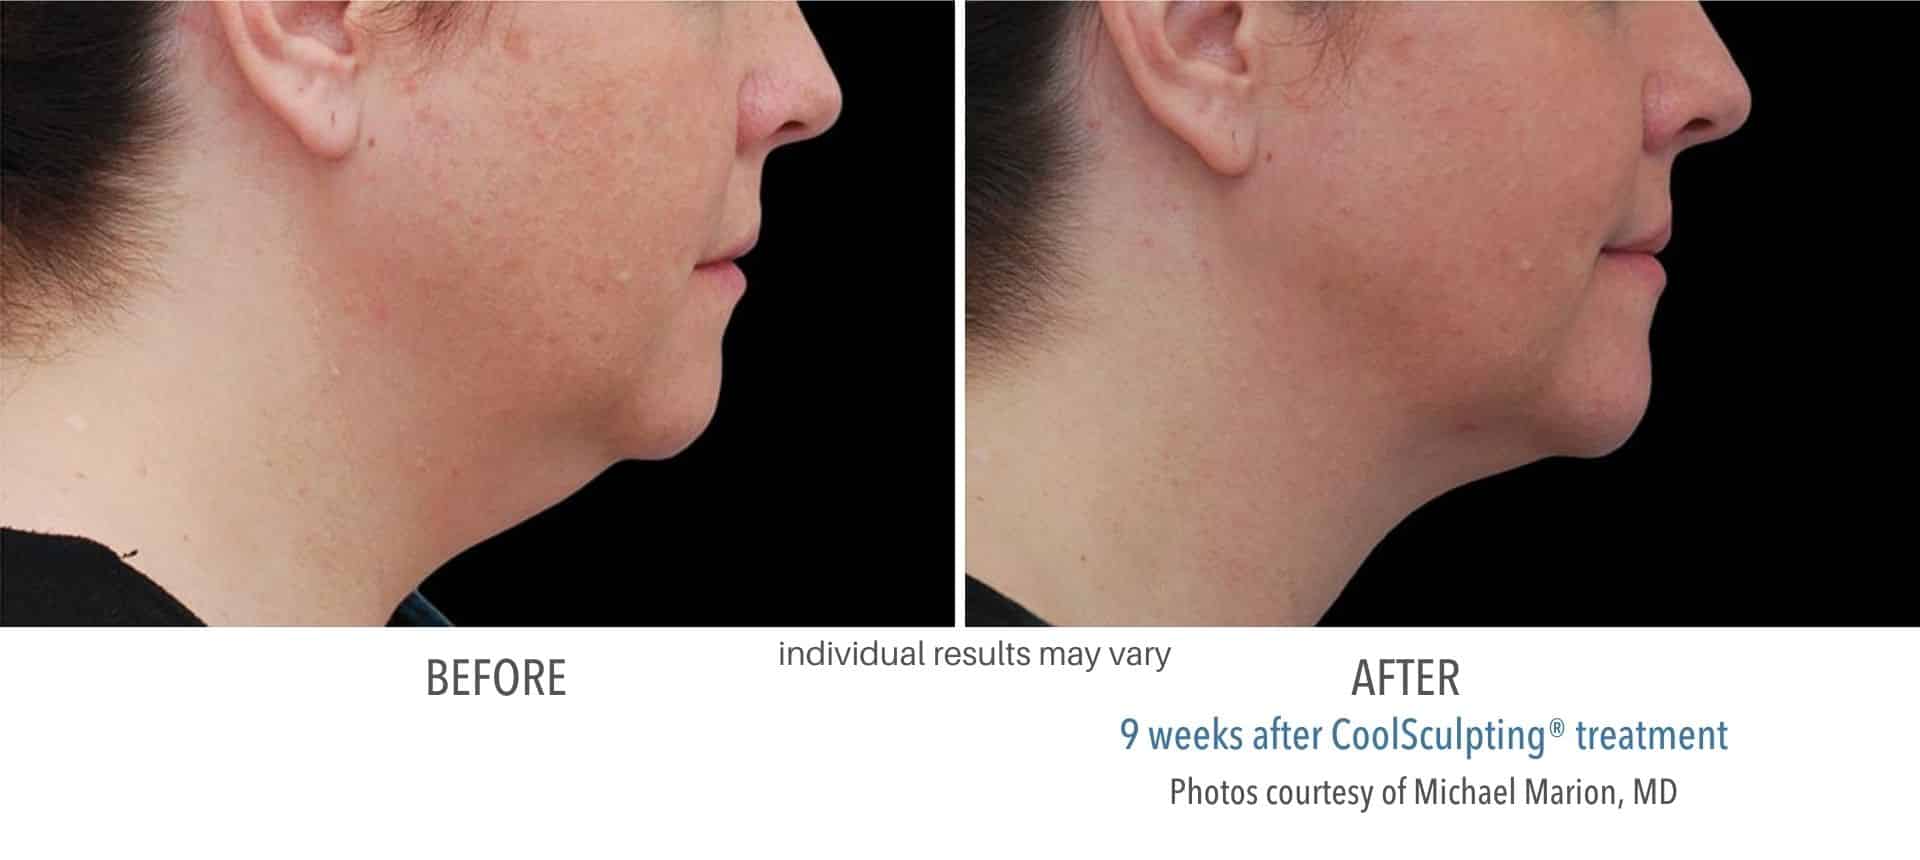 Coolsculpting chin before and after results.